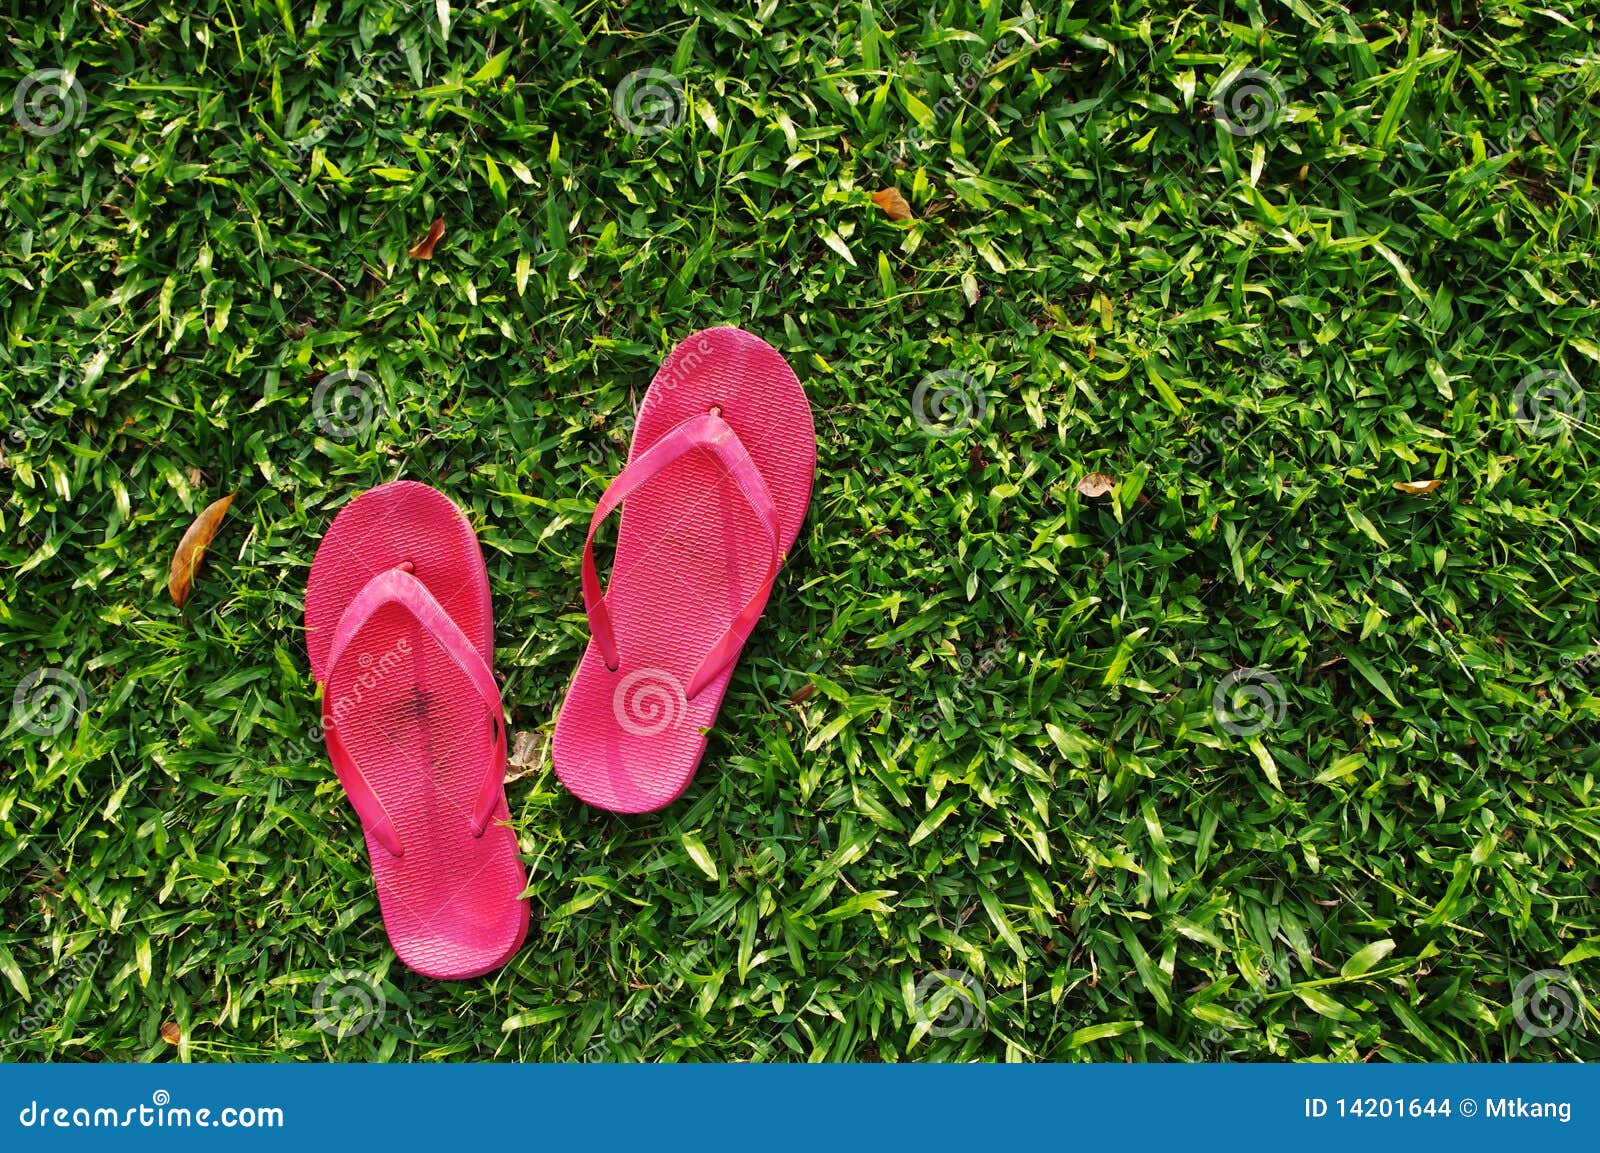 Flip flops on grass field stock photo. Image of relaxation - 14201644